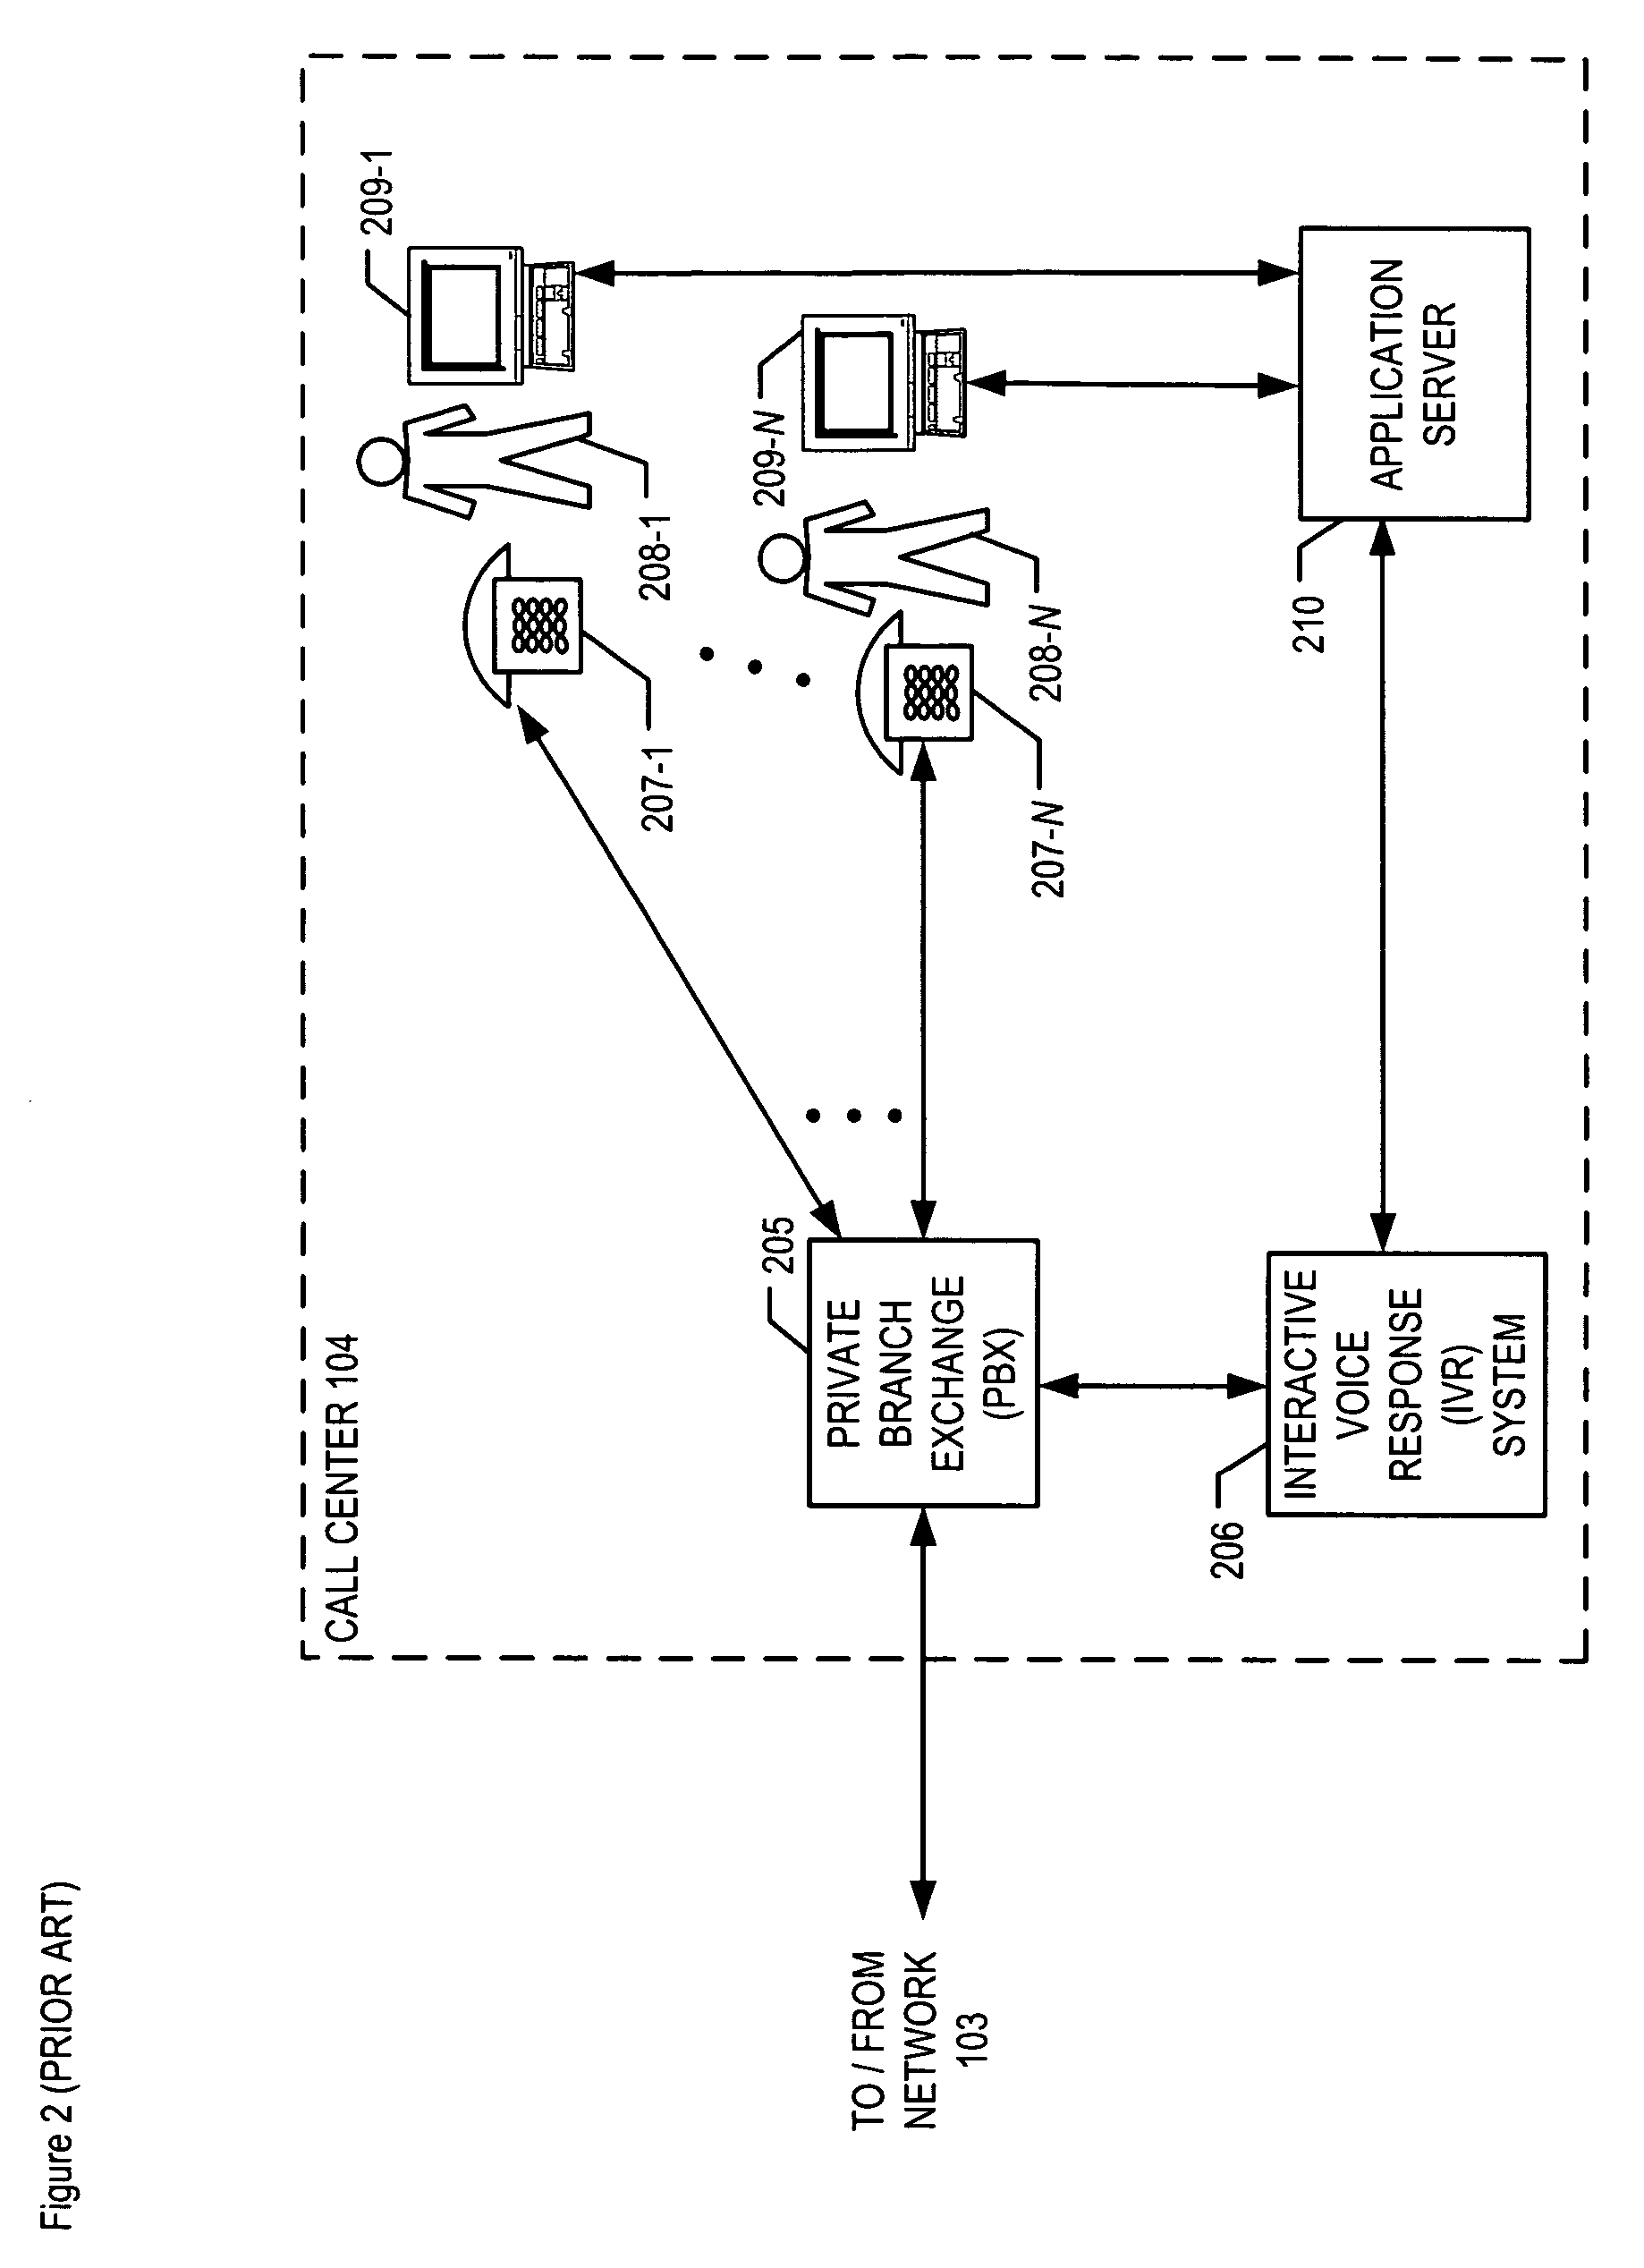 Interactive voice response system with partial human monitoring